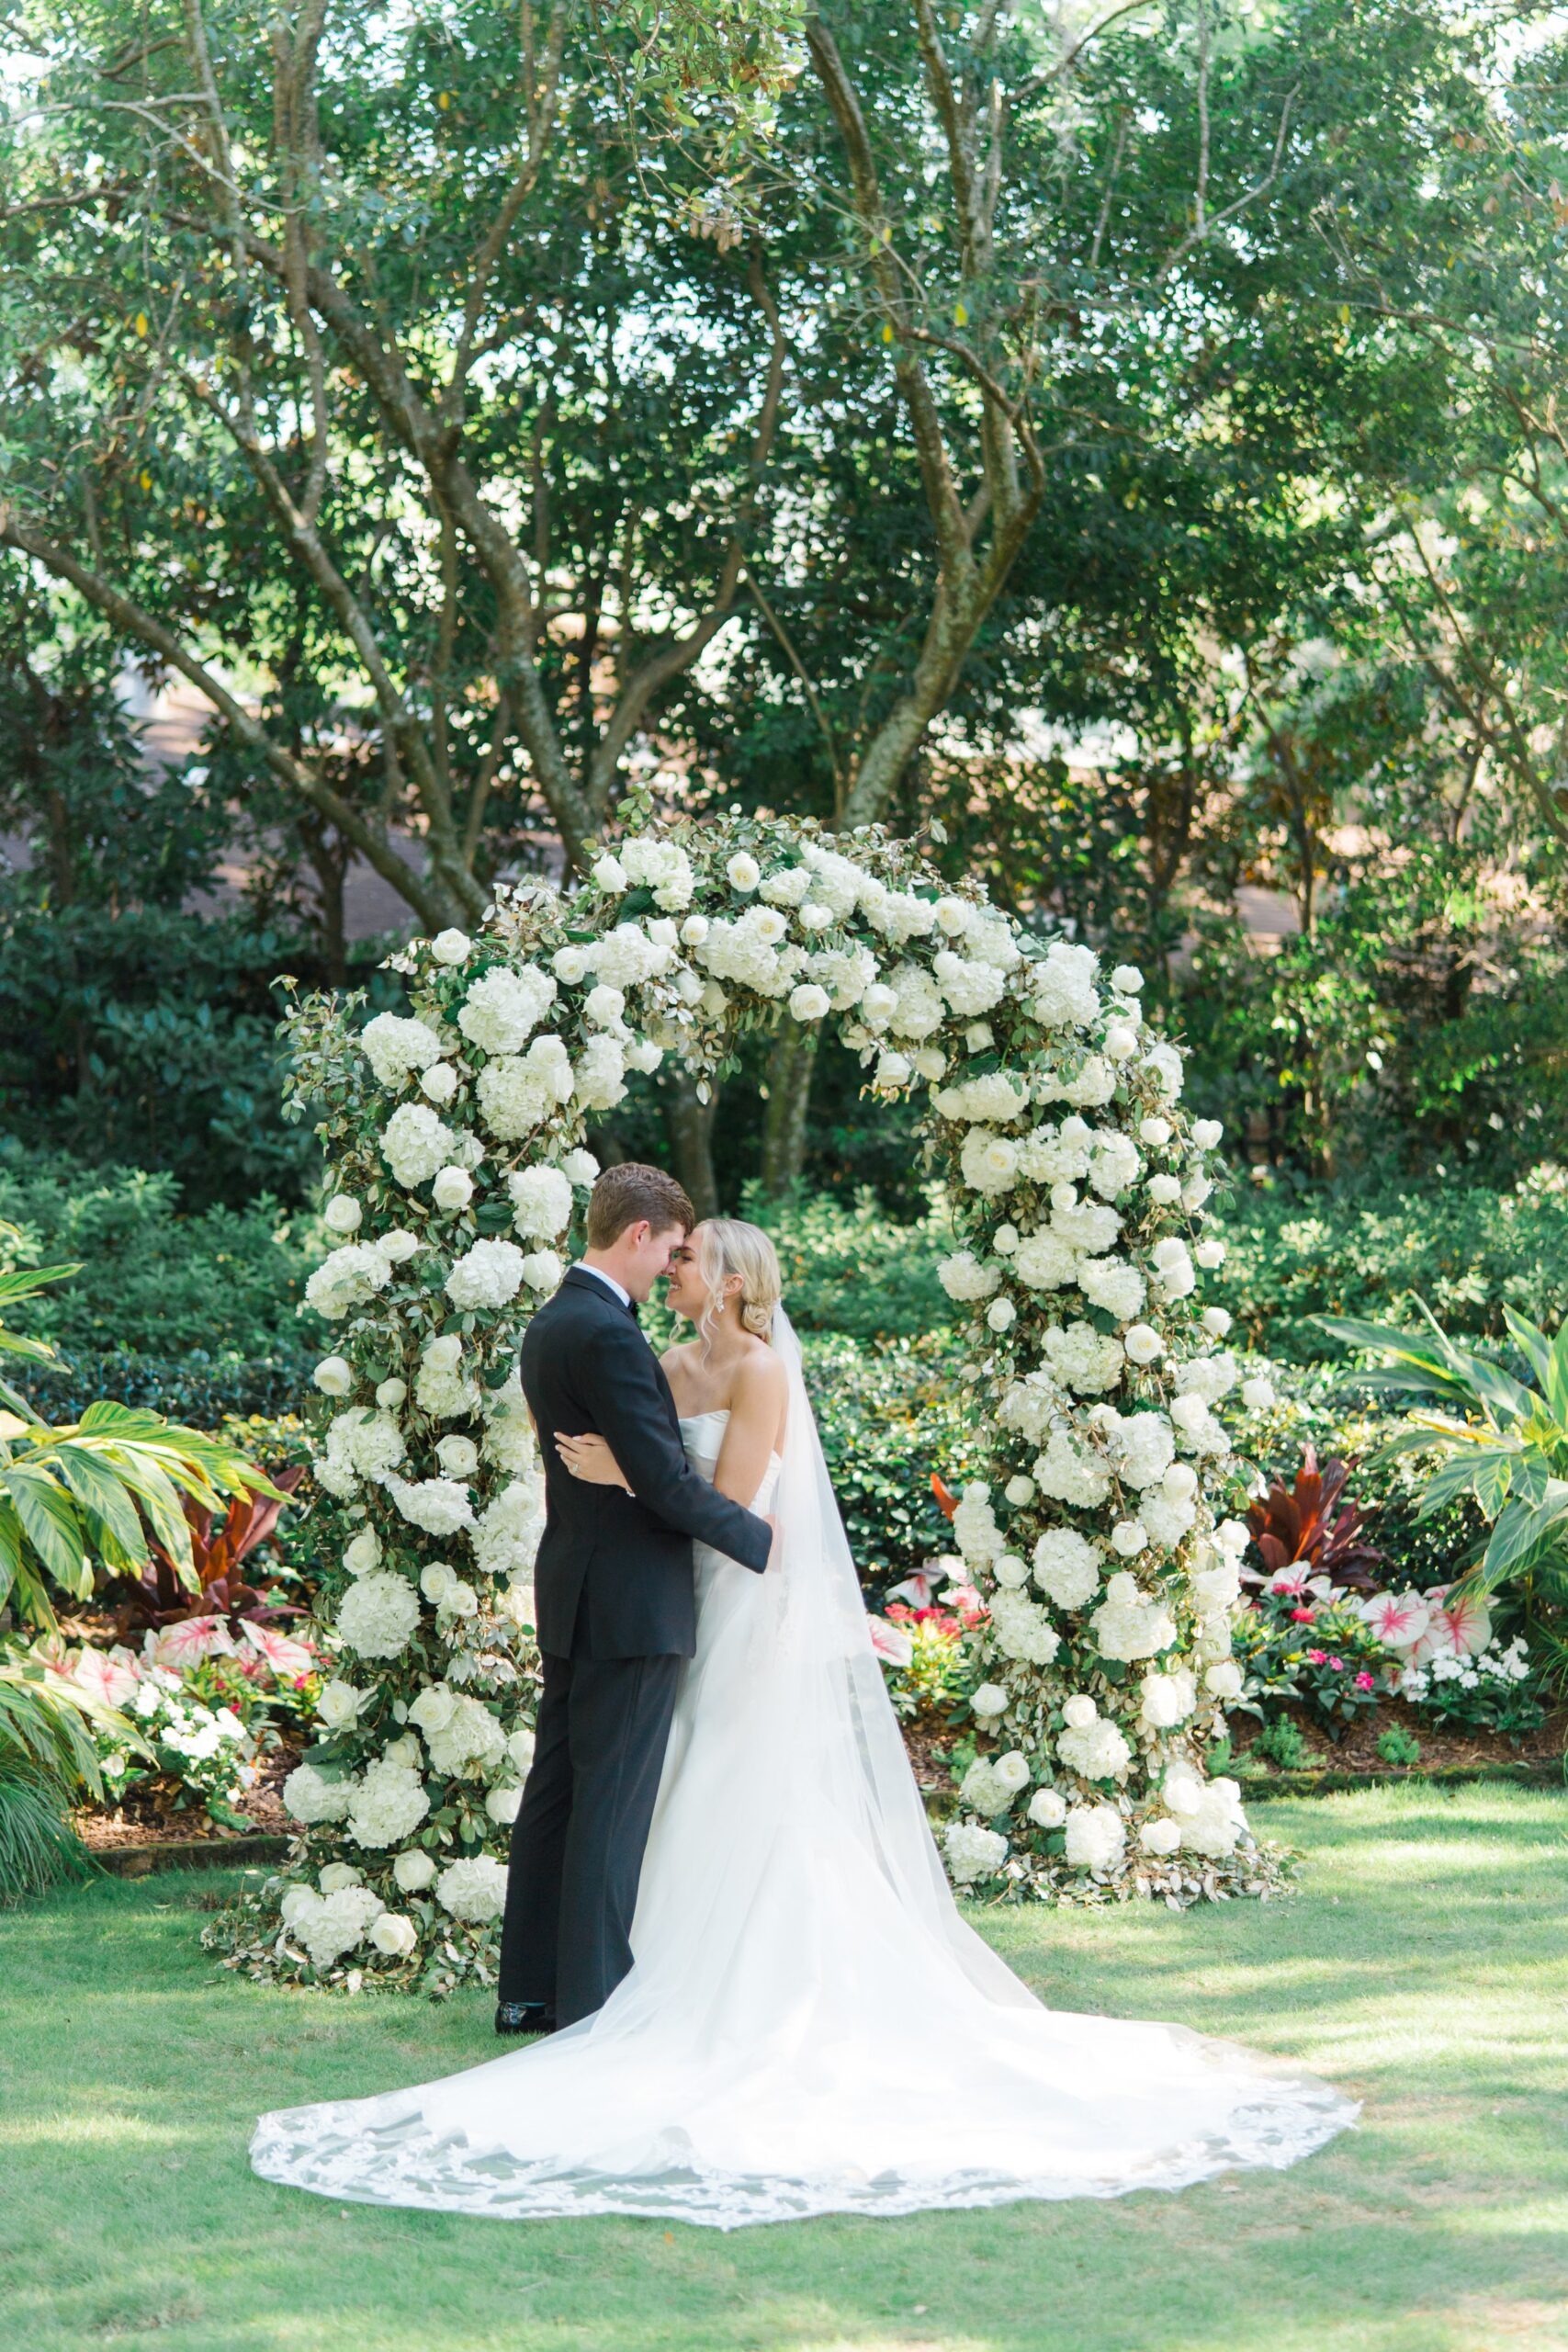 Bride and groom in front of floral arch. East Coast Destination Wedding Photographer.